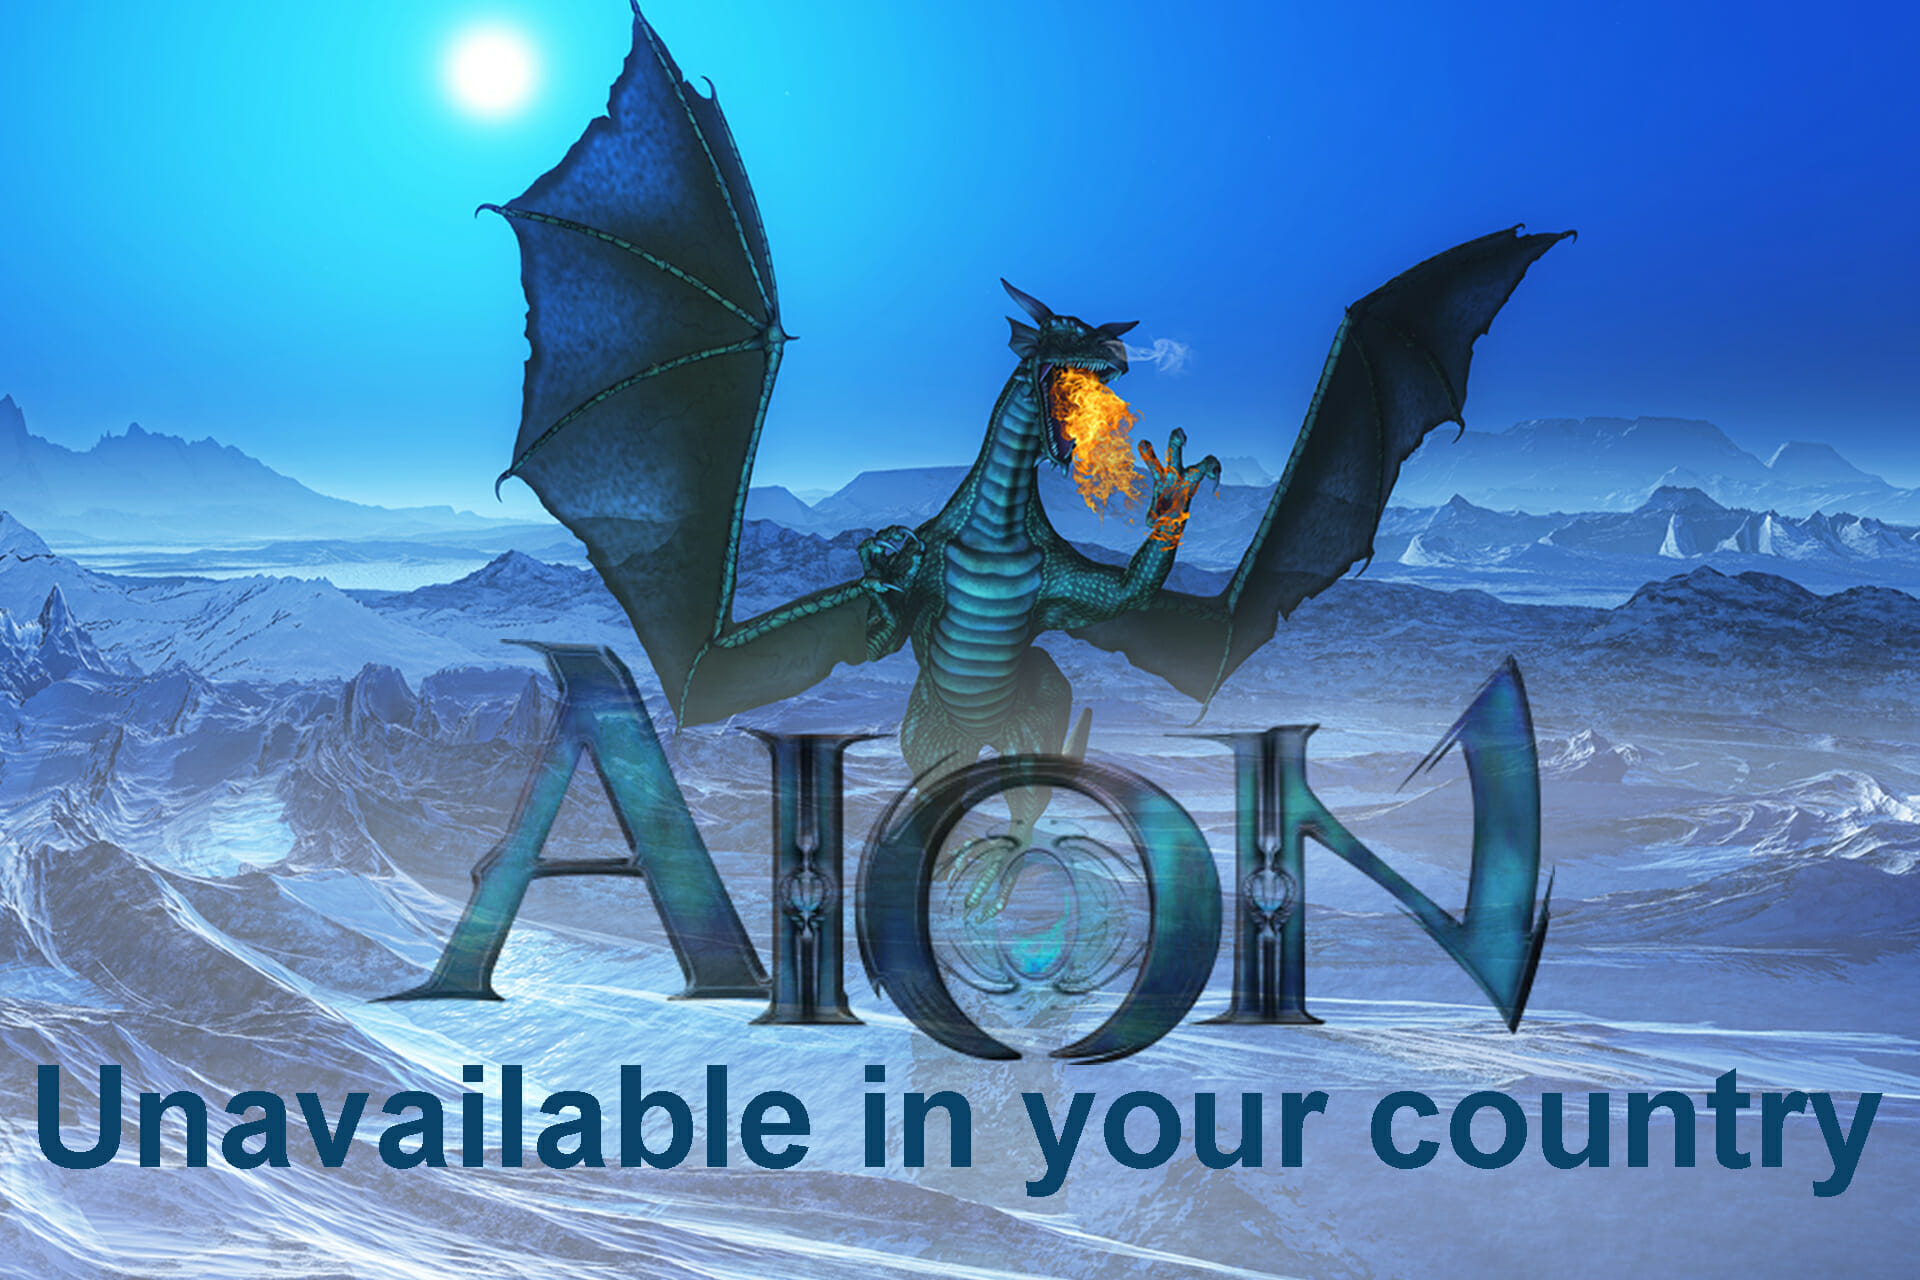 AION error this program is unavailable in your country